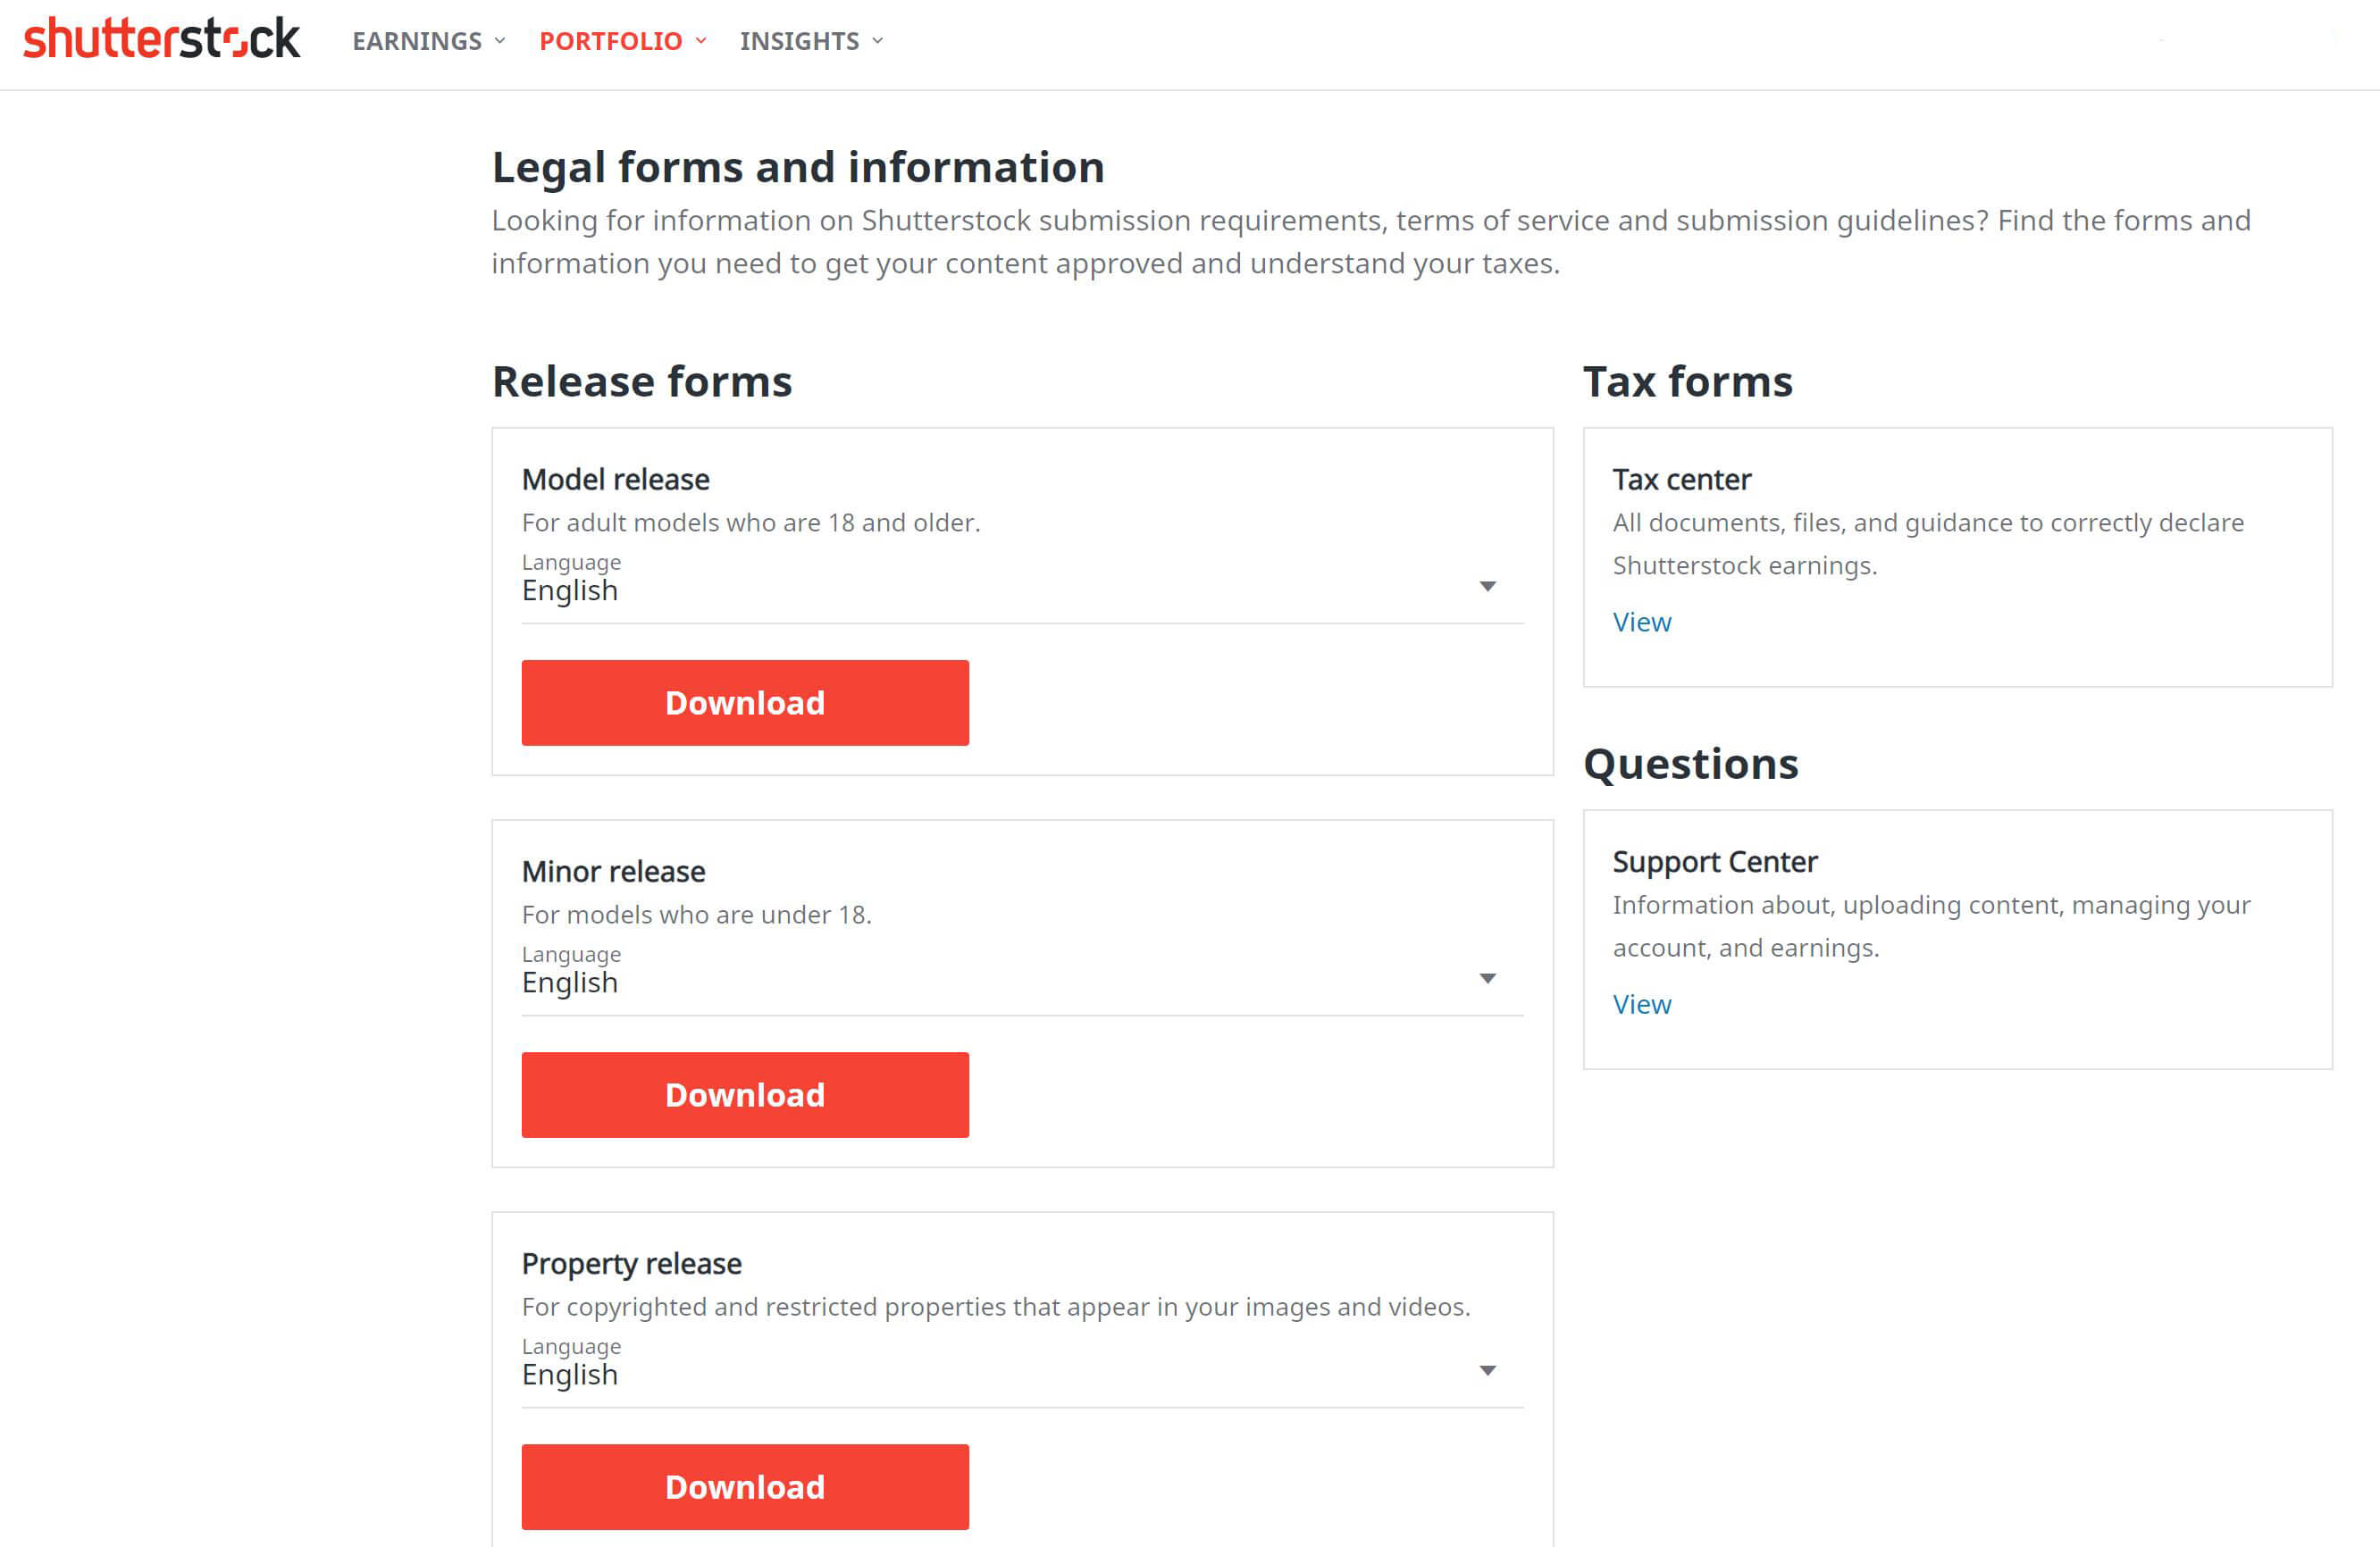 Shutterstock Legal forms